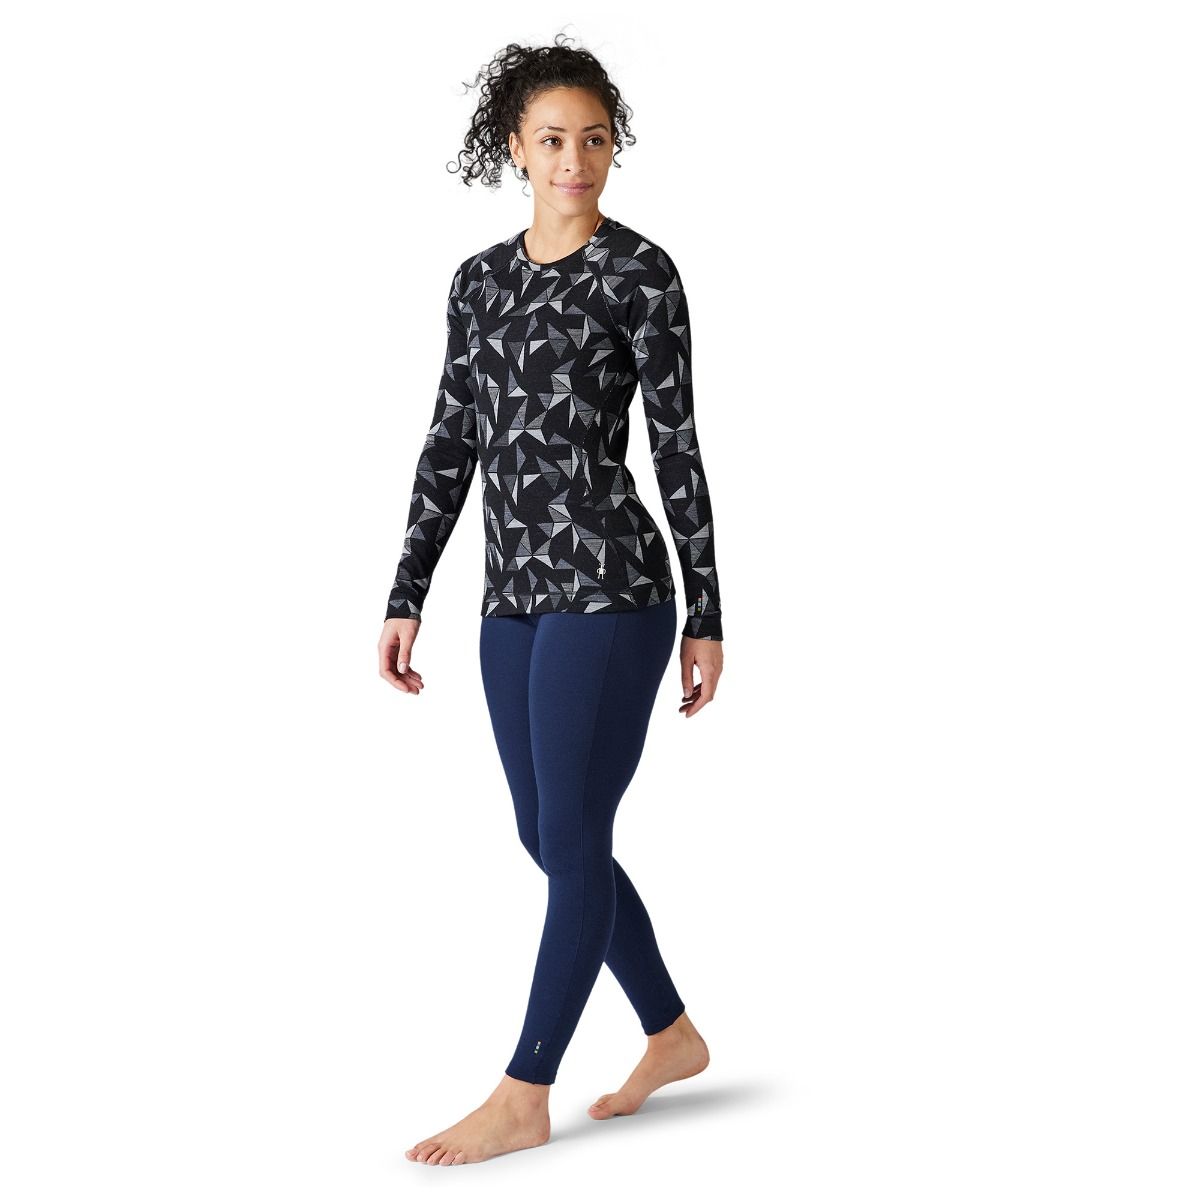 Kenco Outfitters | Smartwool Women's Merino 250 Baselayer Crew Top